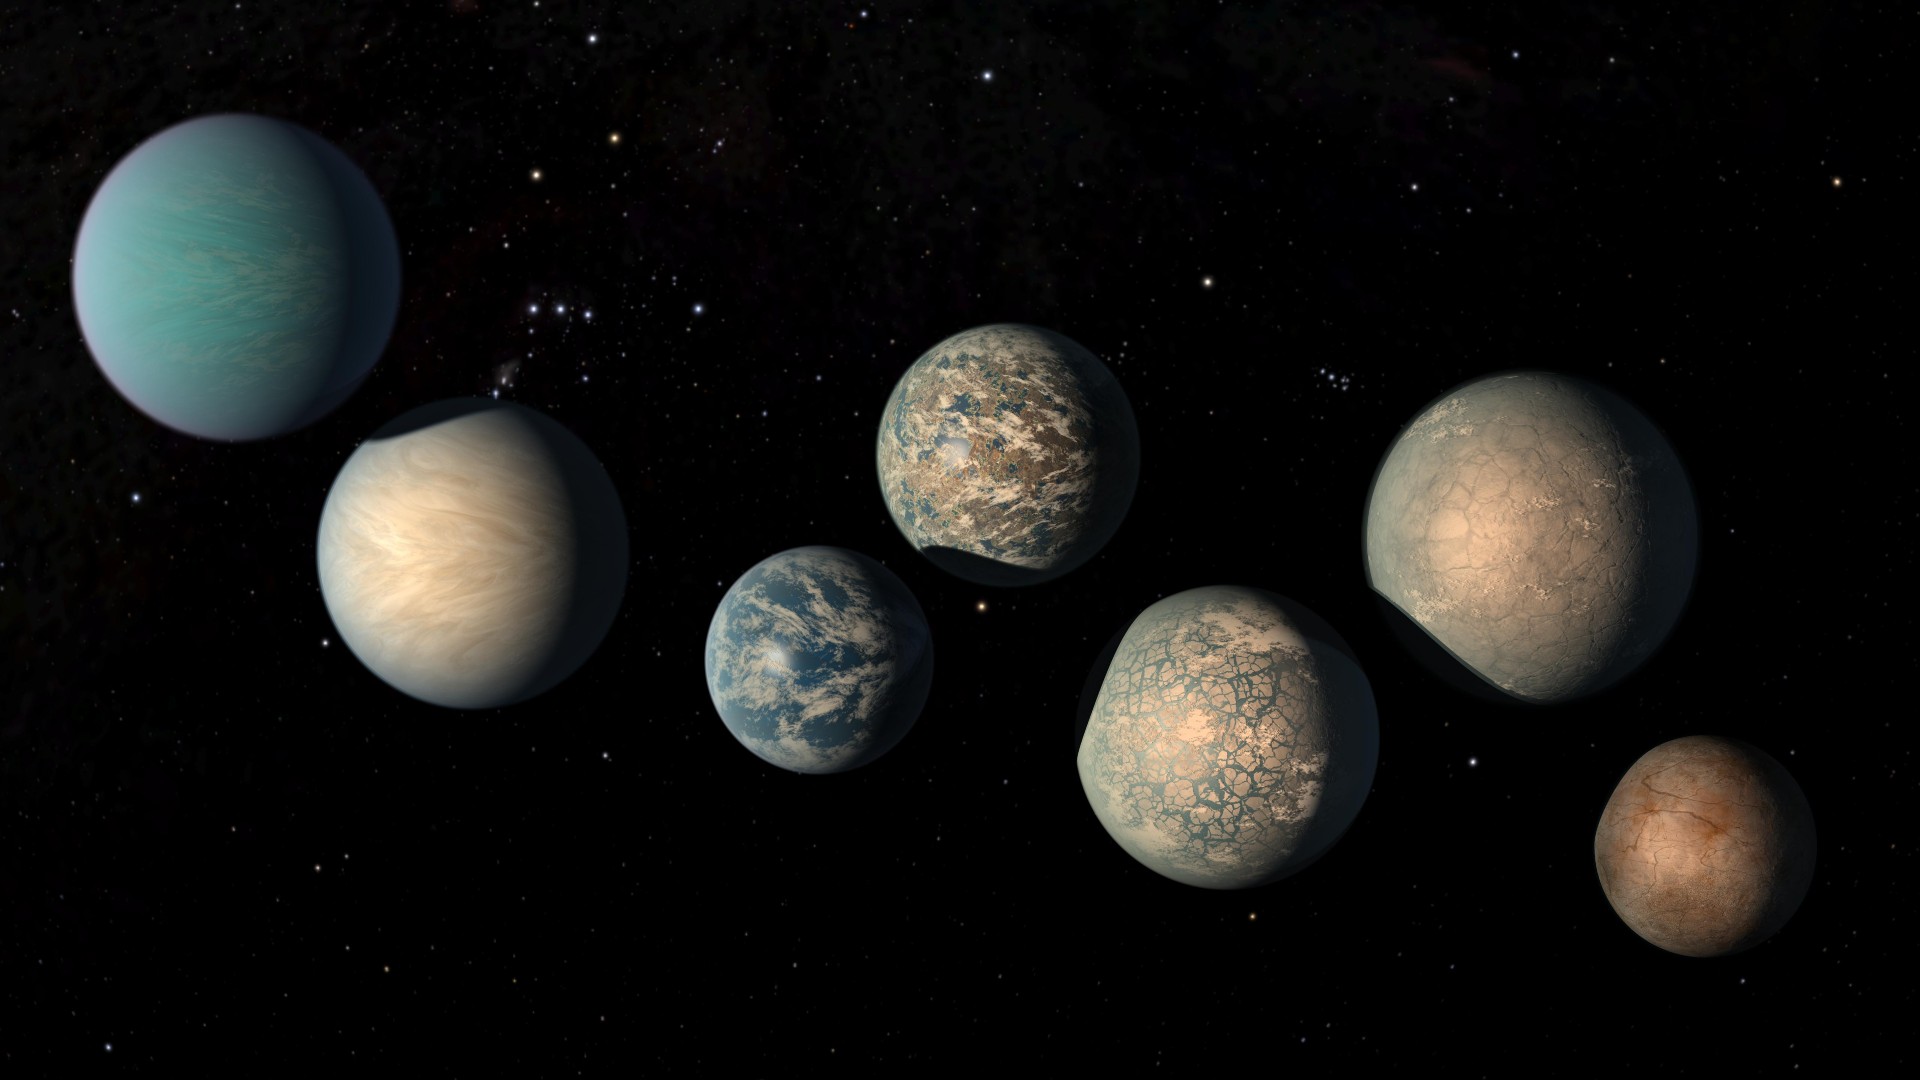 Illustration of the Planets TRAPPIST-1 as of February 2018. There are 7 similarly sized planets on a black background.